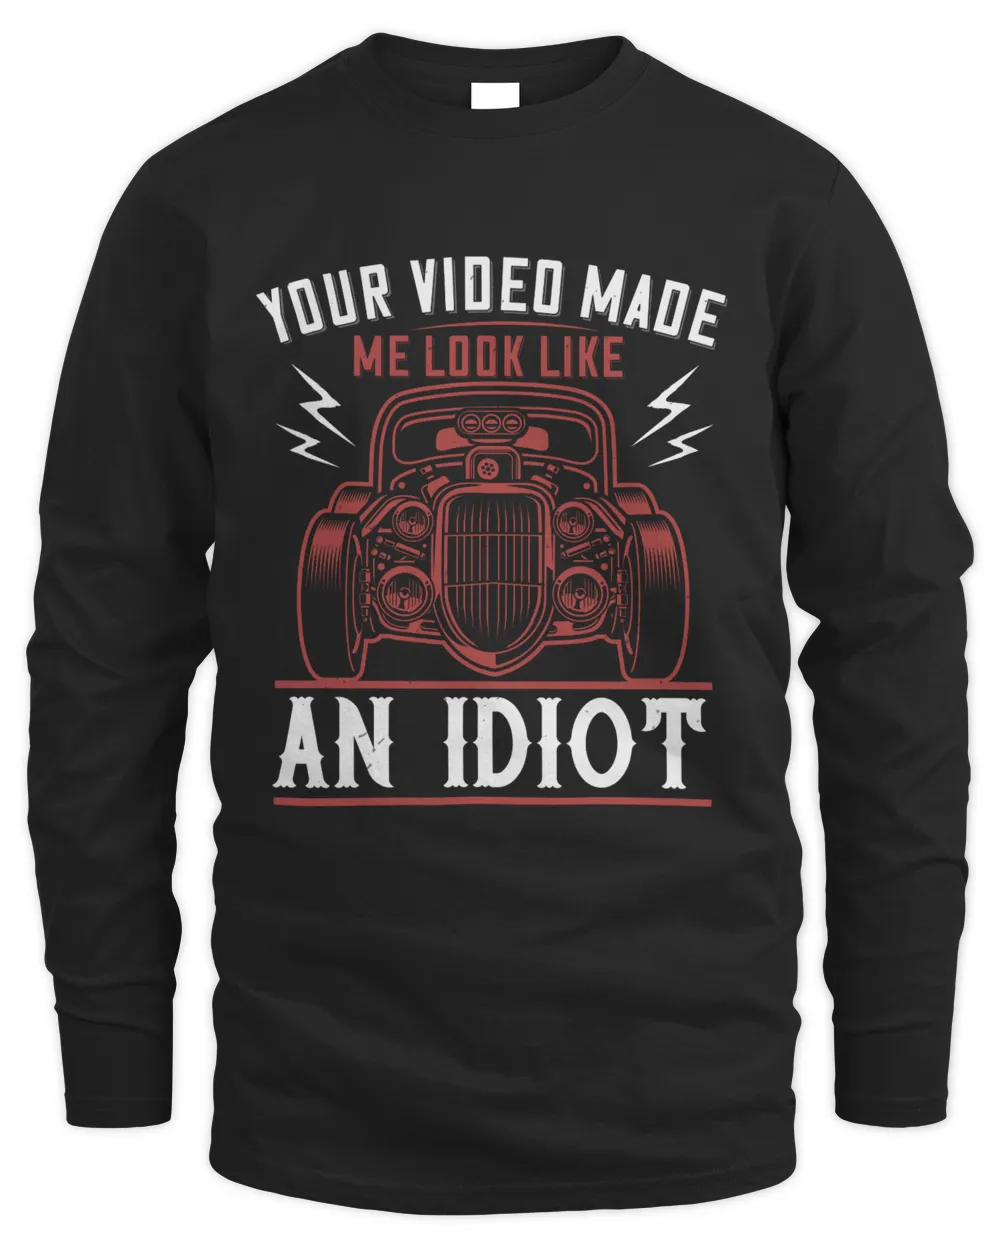 Your video made me look like an idiot-01